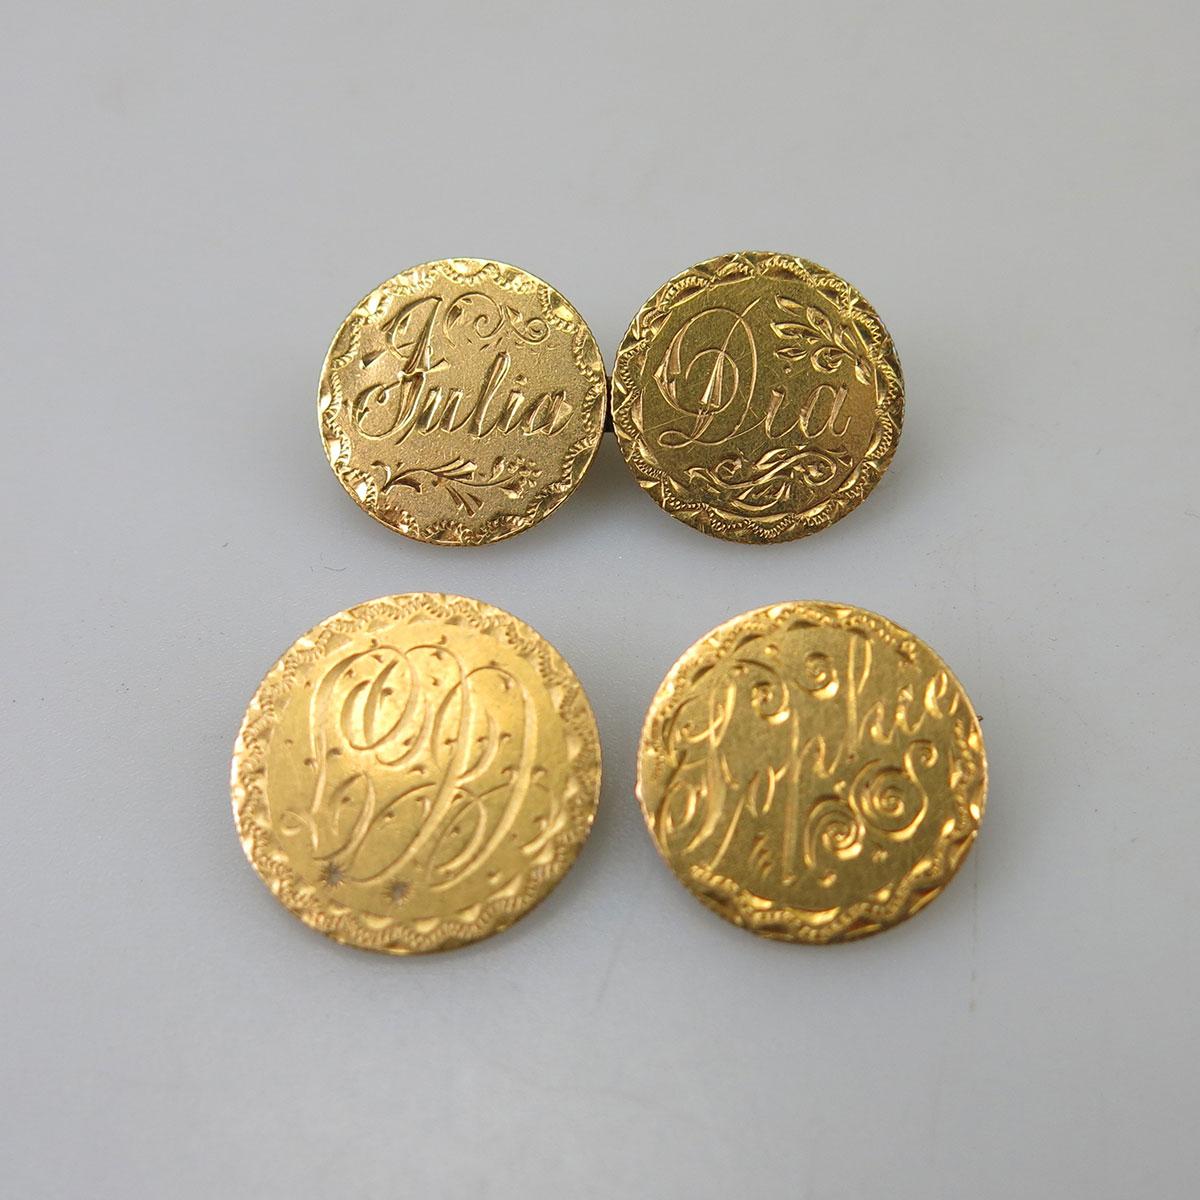 4 Small Gold Coins